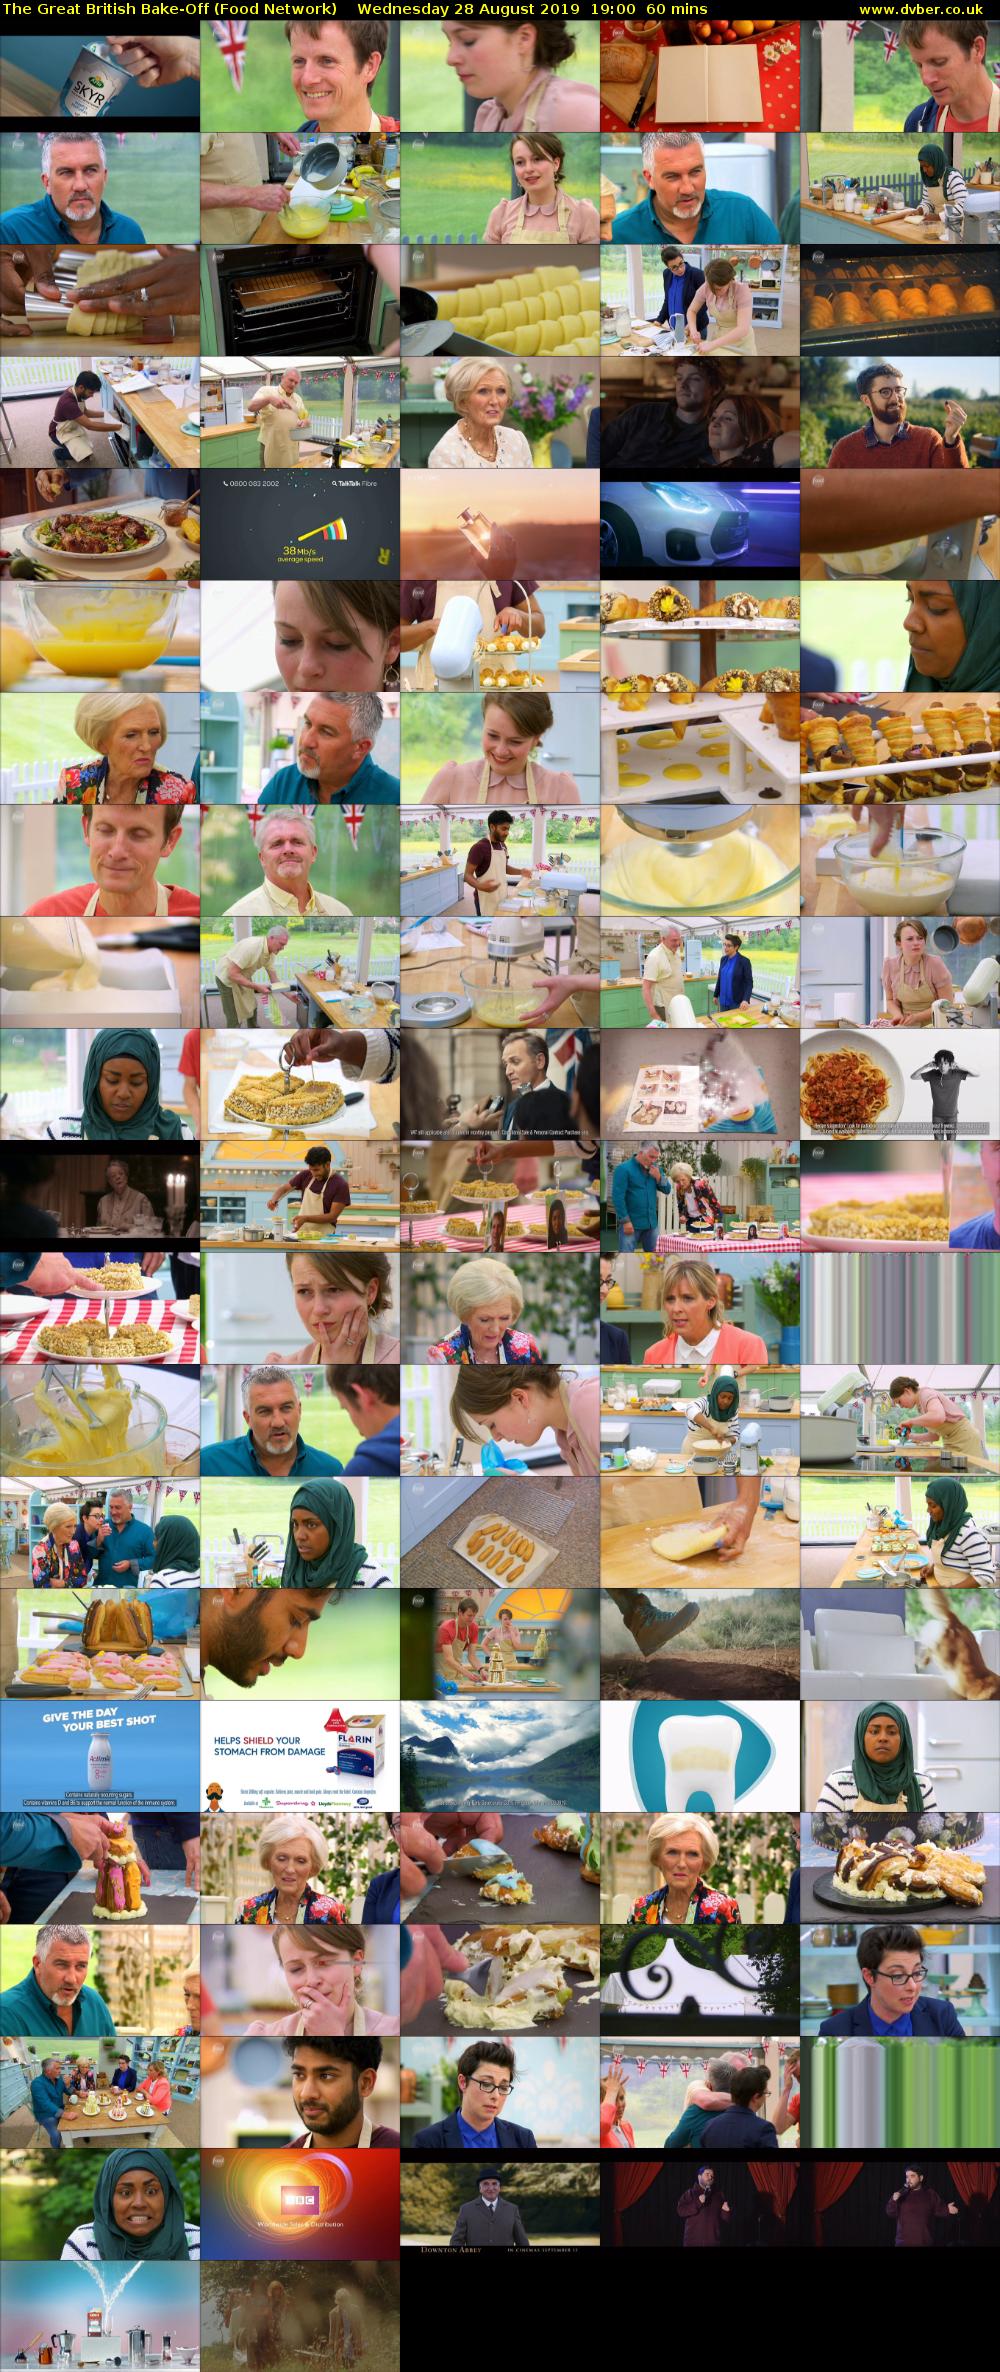 The Great British Bake-Off (Food Network) Wednesday 28 August 2019 19:00 - 20:00